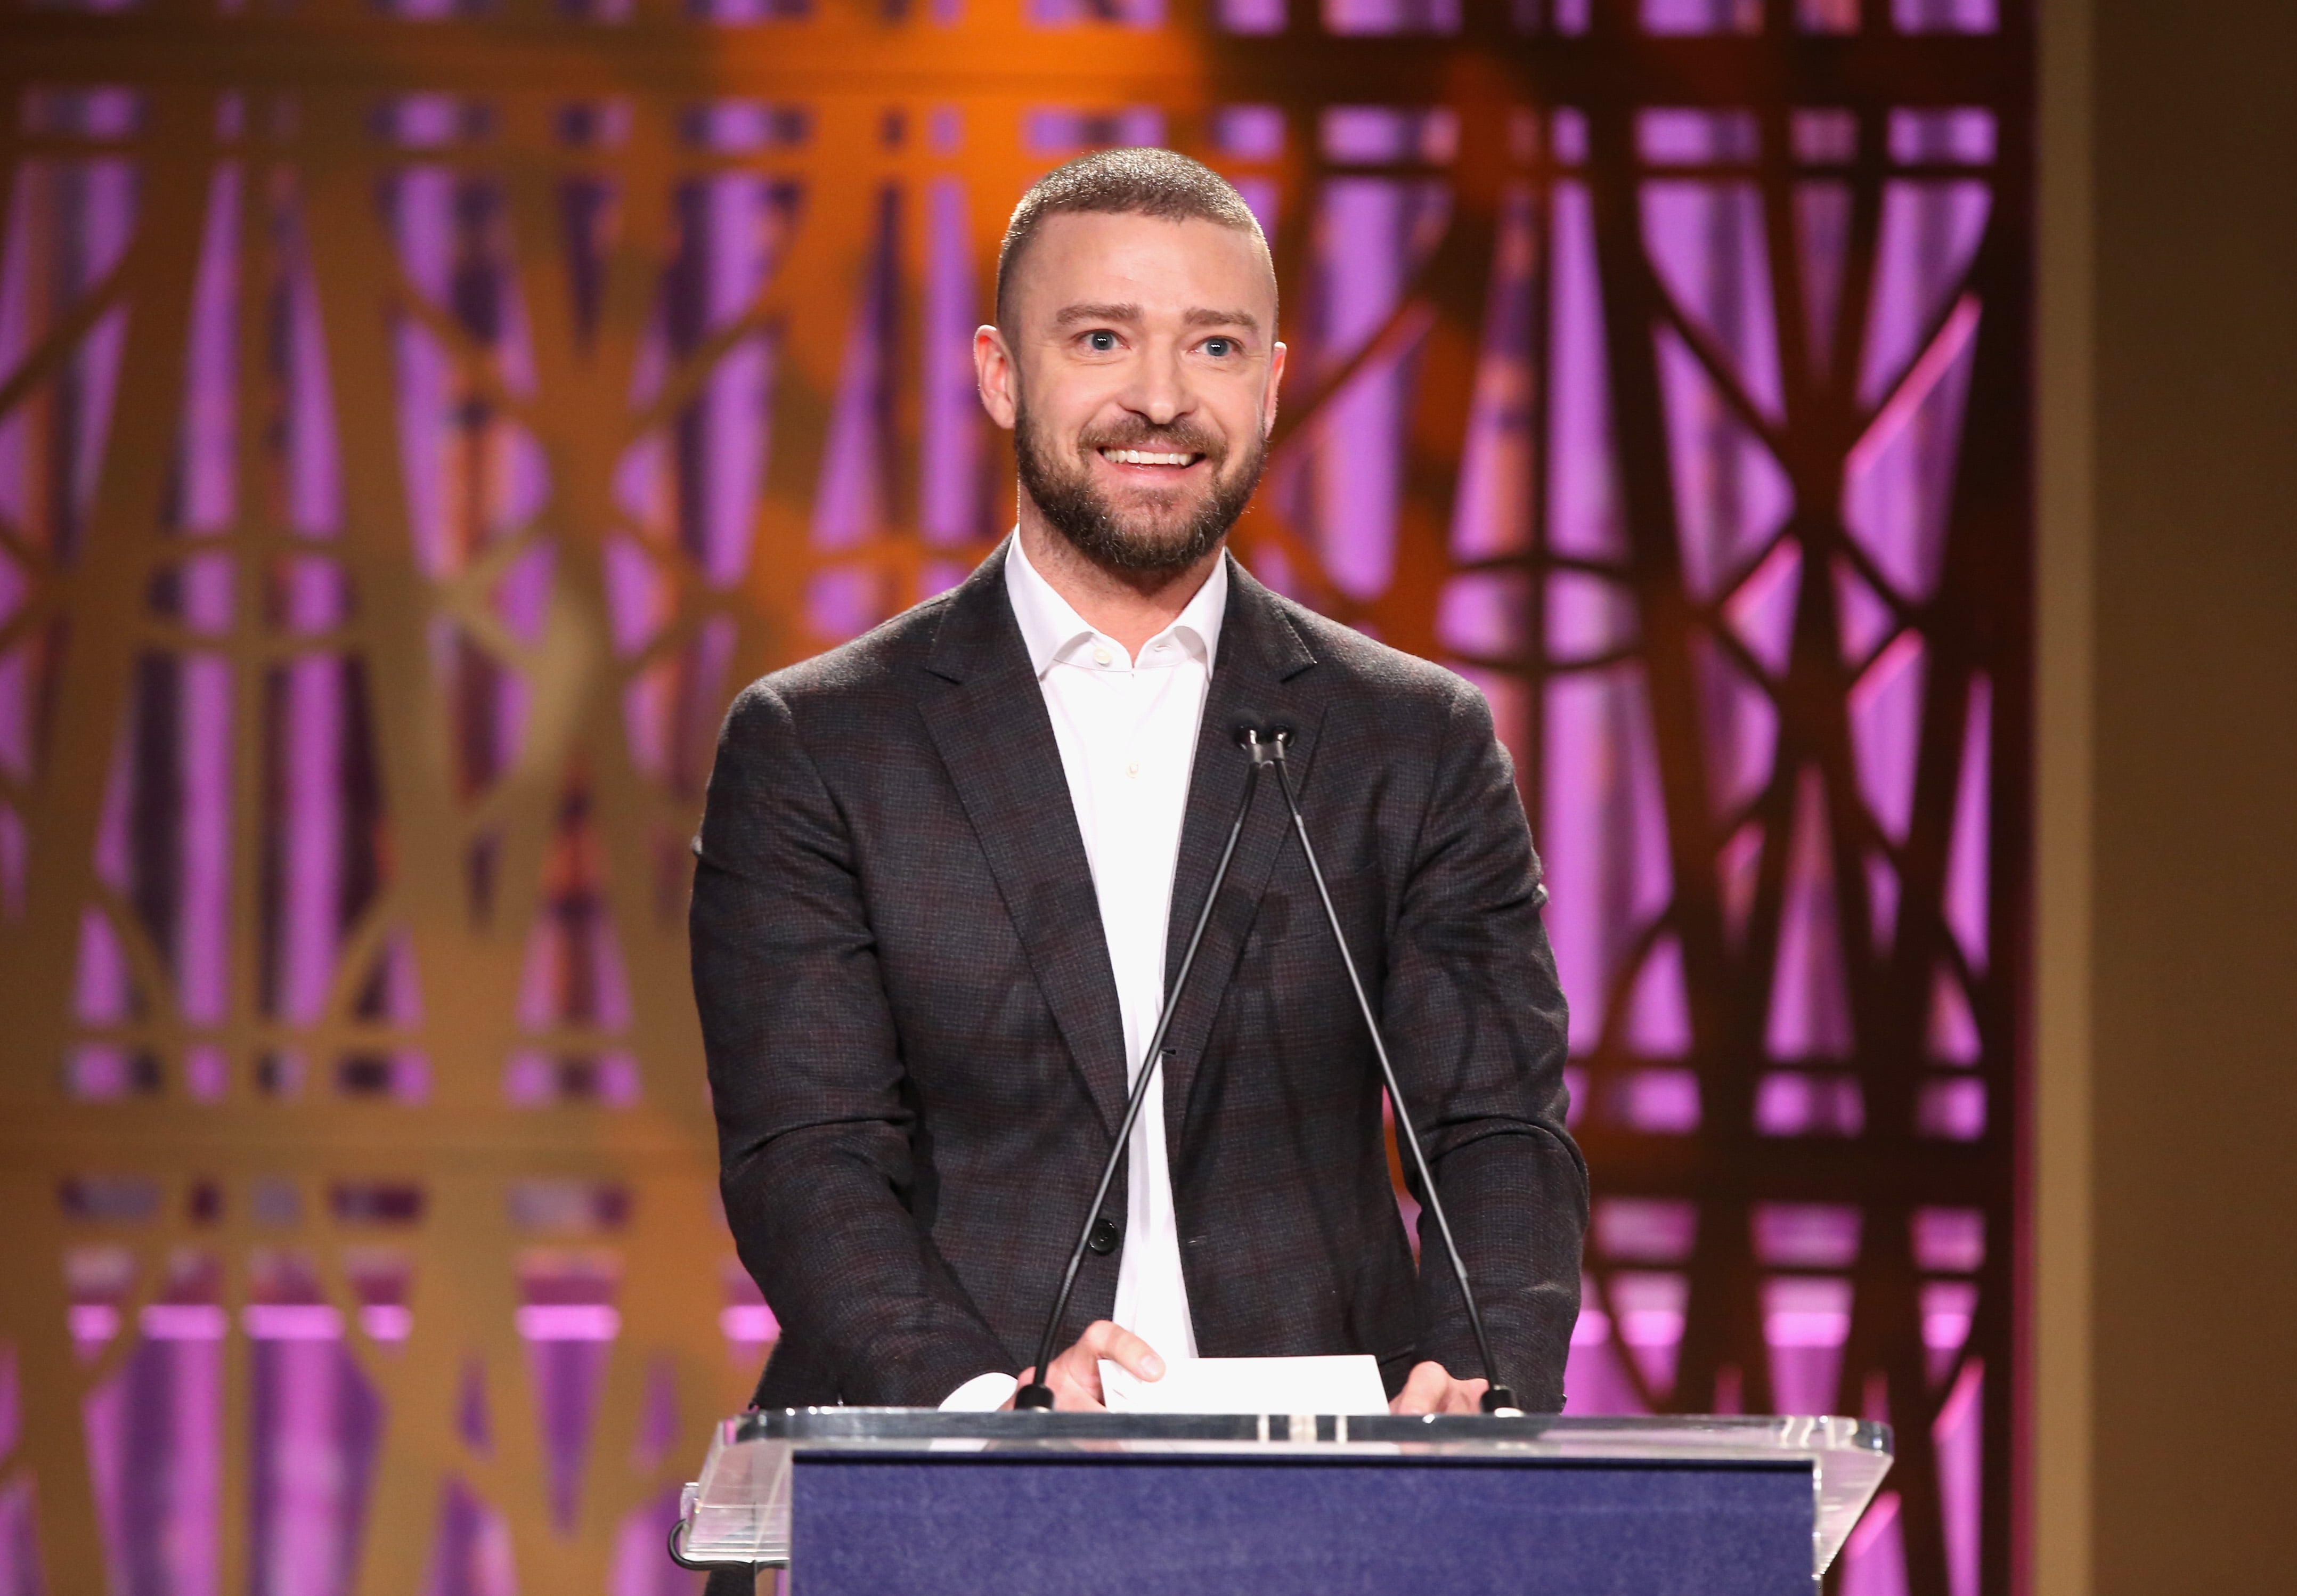 Justin Timberlake jokes about the moment he was tackled by